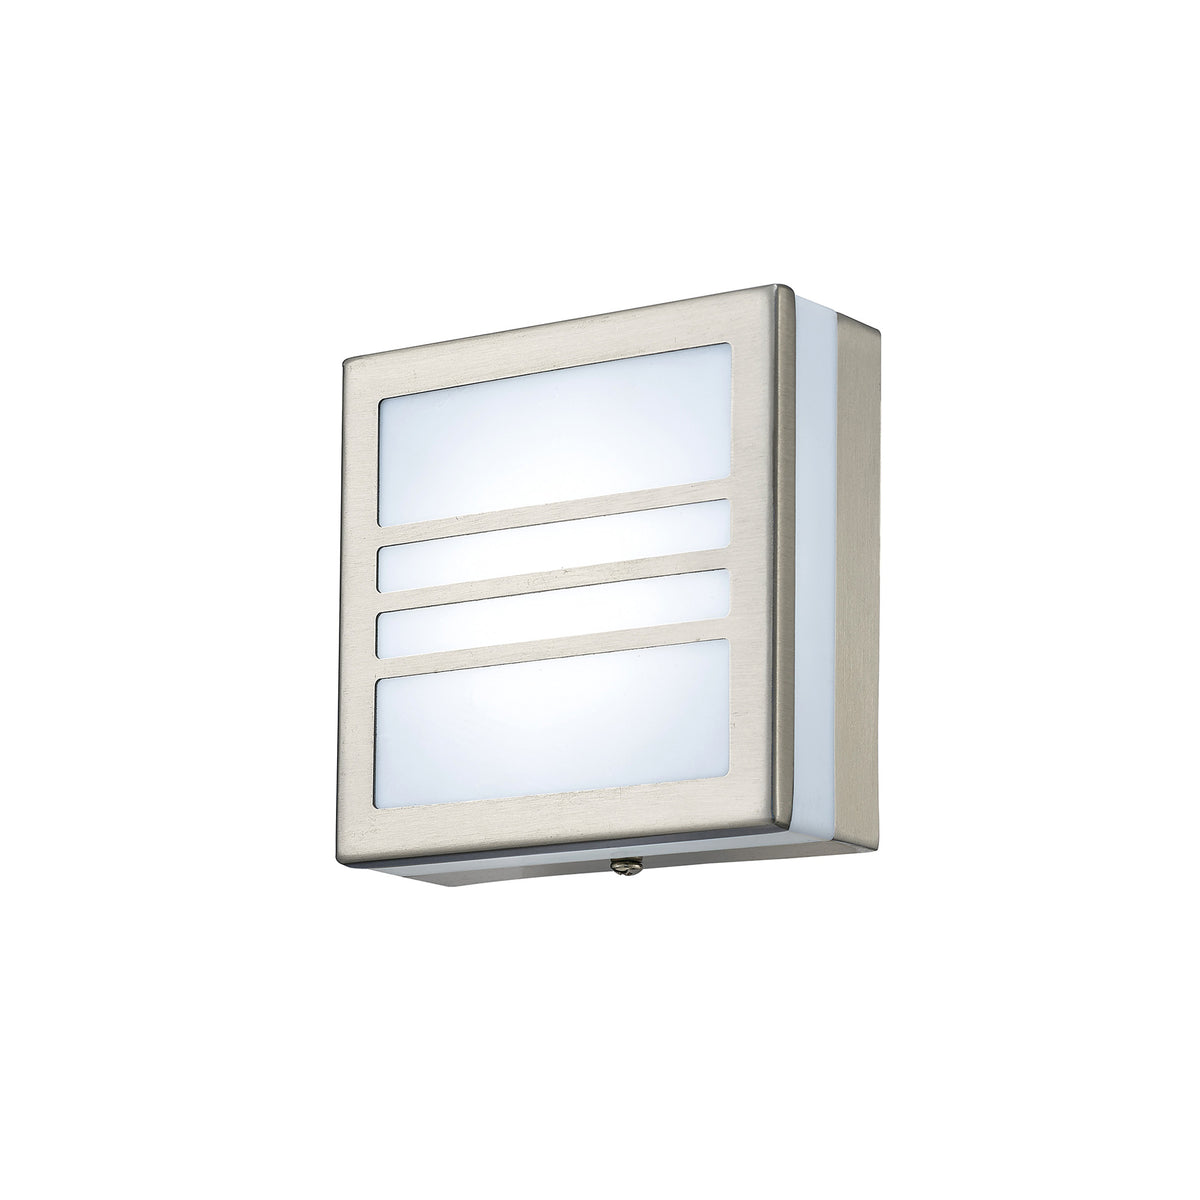 Aldo Square/Round Flush Ceiling/Wall Lamp 2.4W LED IP44 Exterior Plain Design Stainless Steel/Opal, 2yrs Warranty